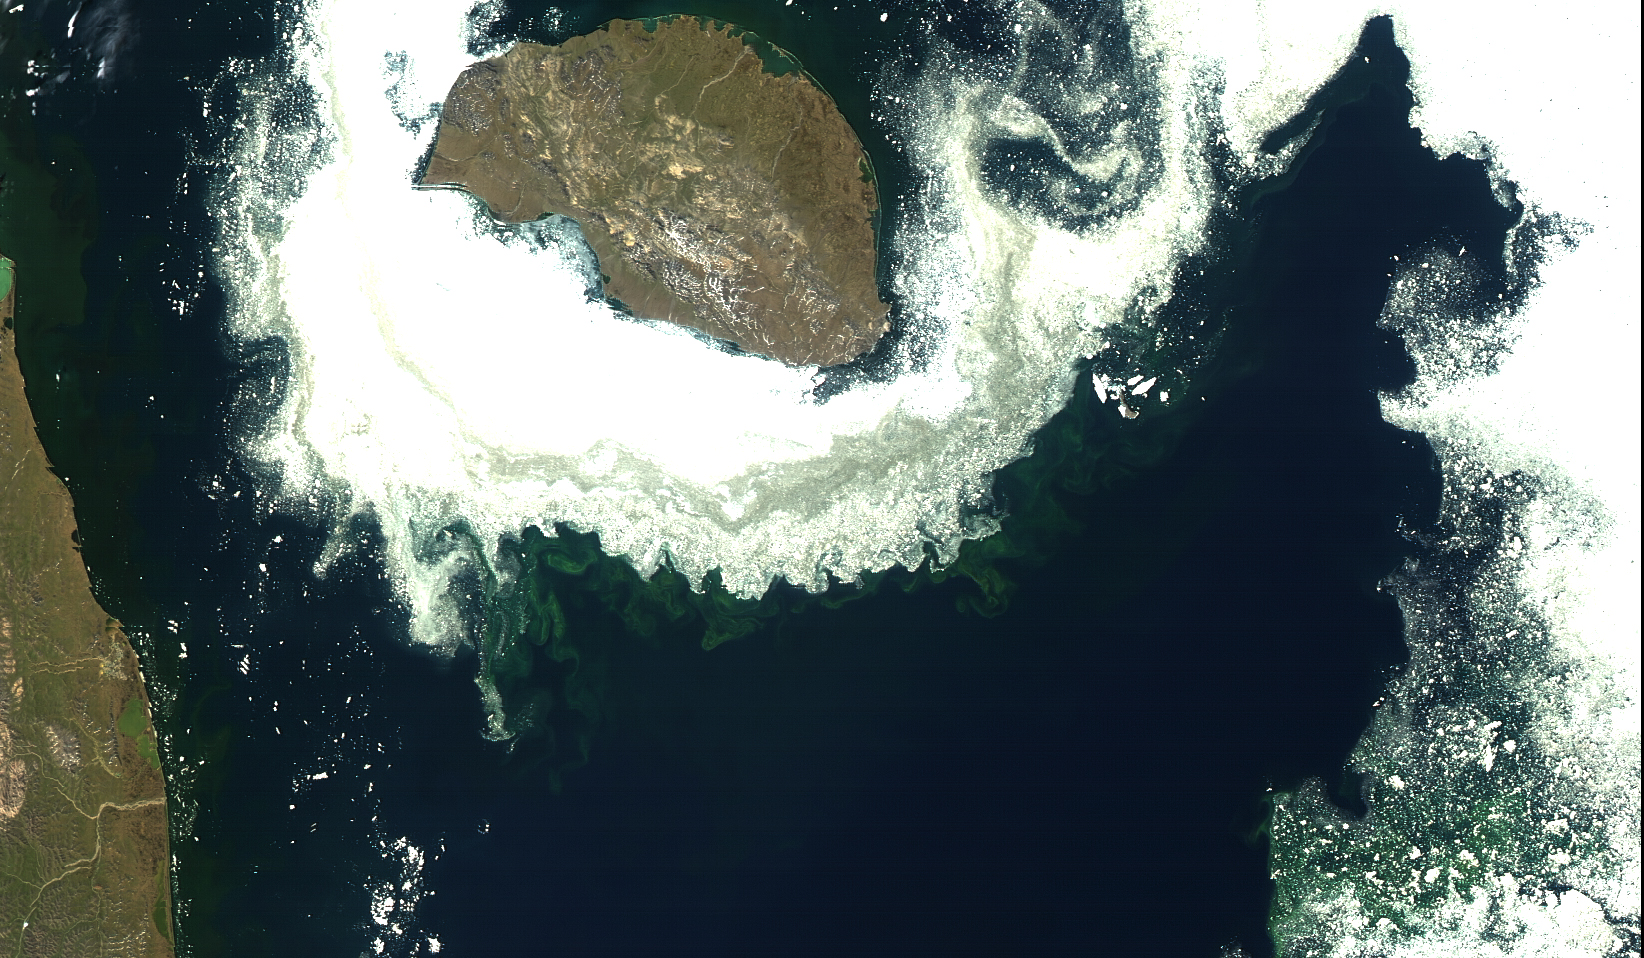 In an undated handout image, a bloom of algae near Wrangel Island, in the Arctic Ocean not far from the easternmost point of Russia. Global warming is altering the ecology of the Arctic Ocean, researchers say, with algae production up an estimated 47 percent since 1997 Ñ a change likely to have a profound effect for animals further up the food chain. (M. Kahru via The New York Times) -- NO SALES; FOR EDITORIAL USE ONLY WITH STORY SLUGGED ARCTIC WARMING BY ZIMMER FOR NOV. 23 2016. ALL OTHER USE PROHIBITED. Ñ